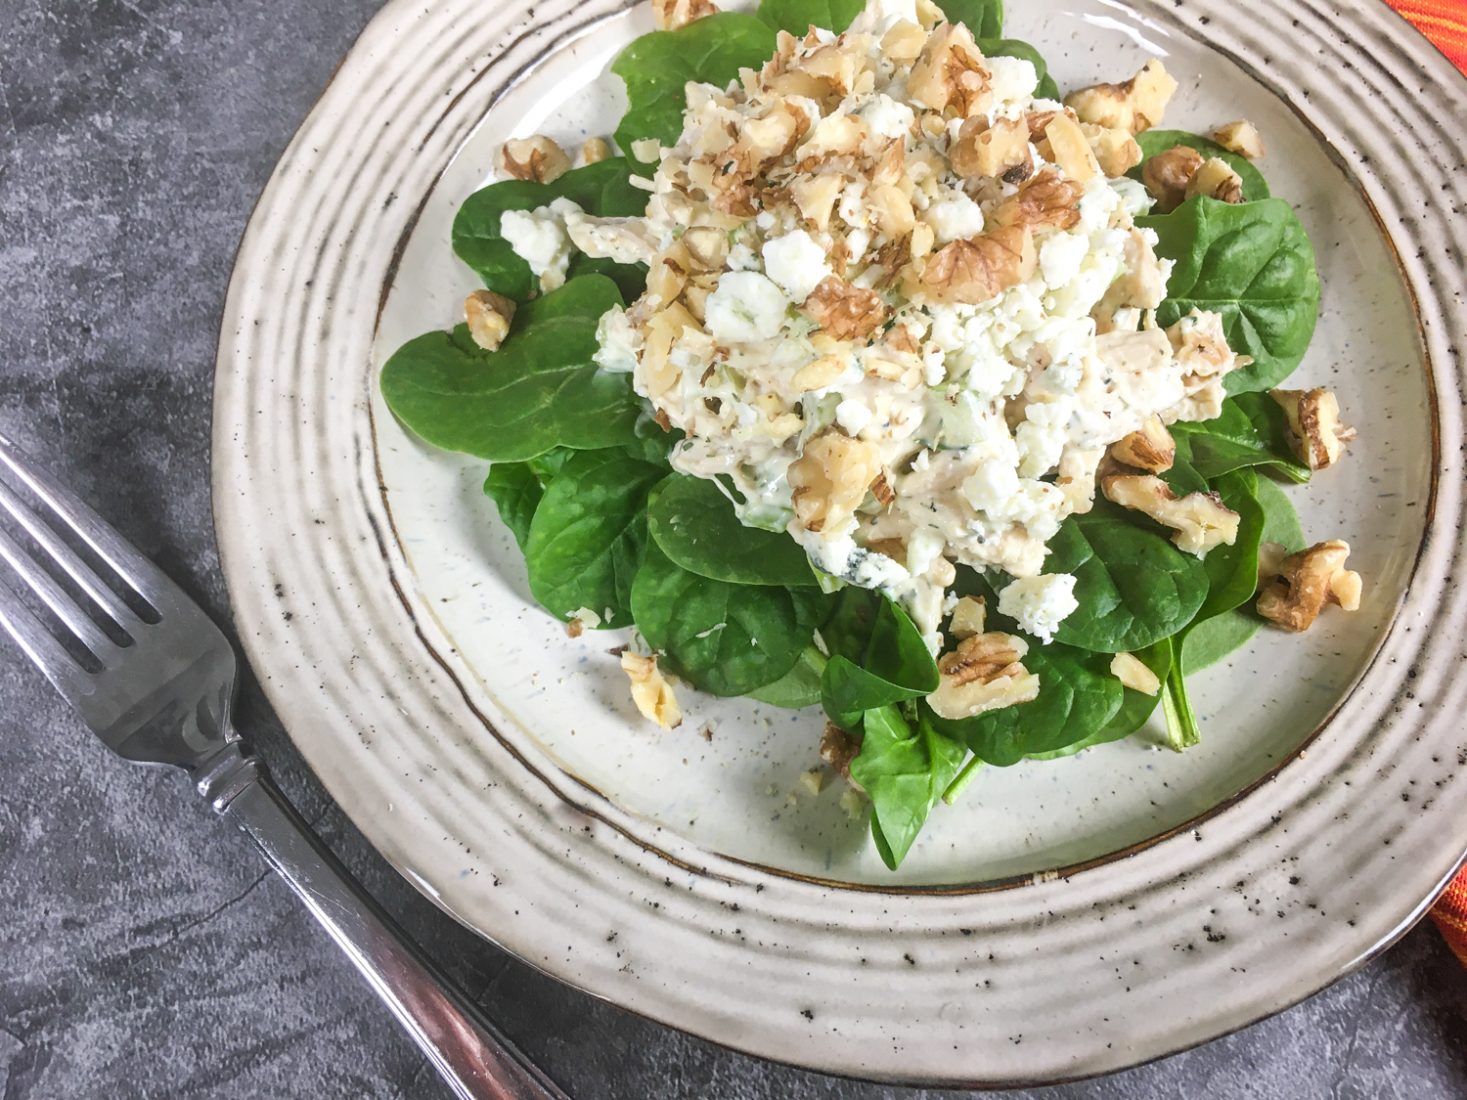 KETO CHICKEN SALAD WITH BLUE CHEESE & WALNUTS